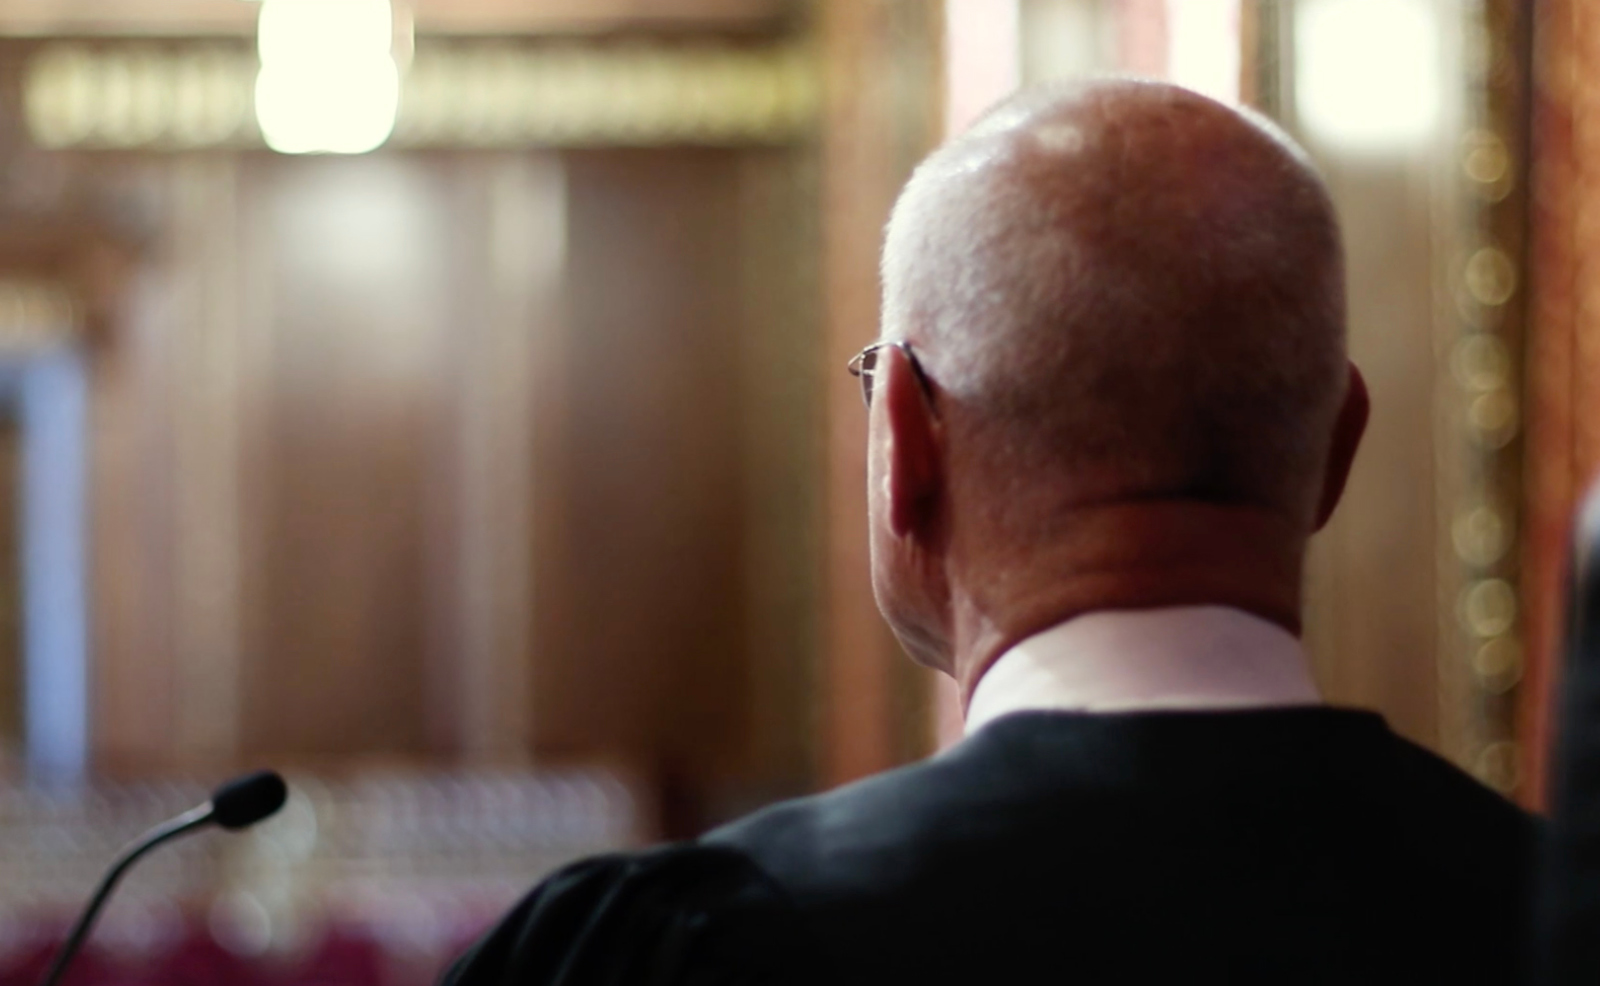 Image of the back of a judge's head